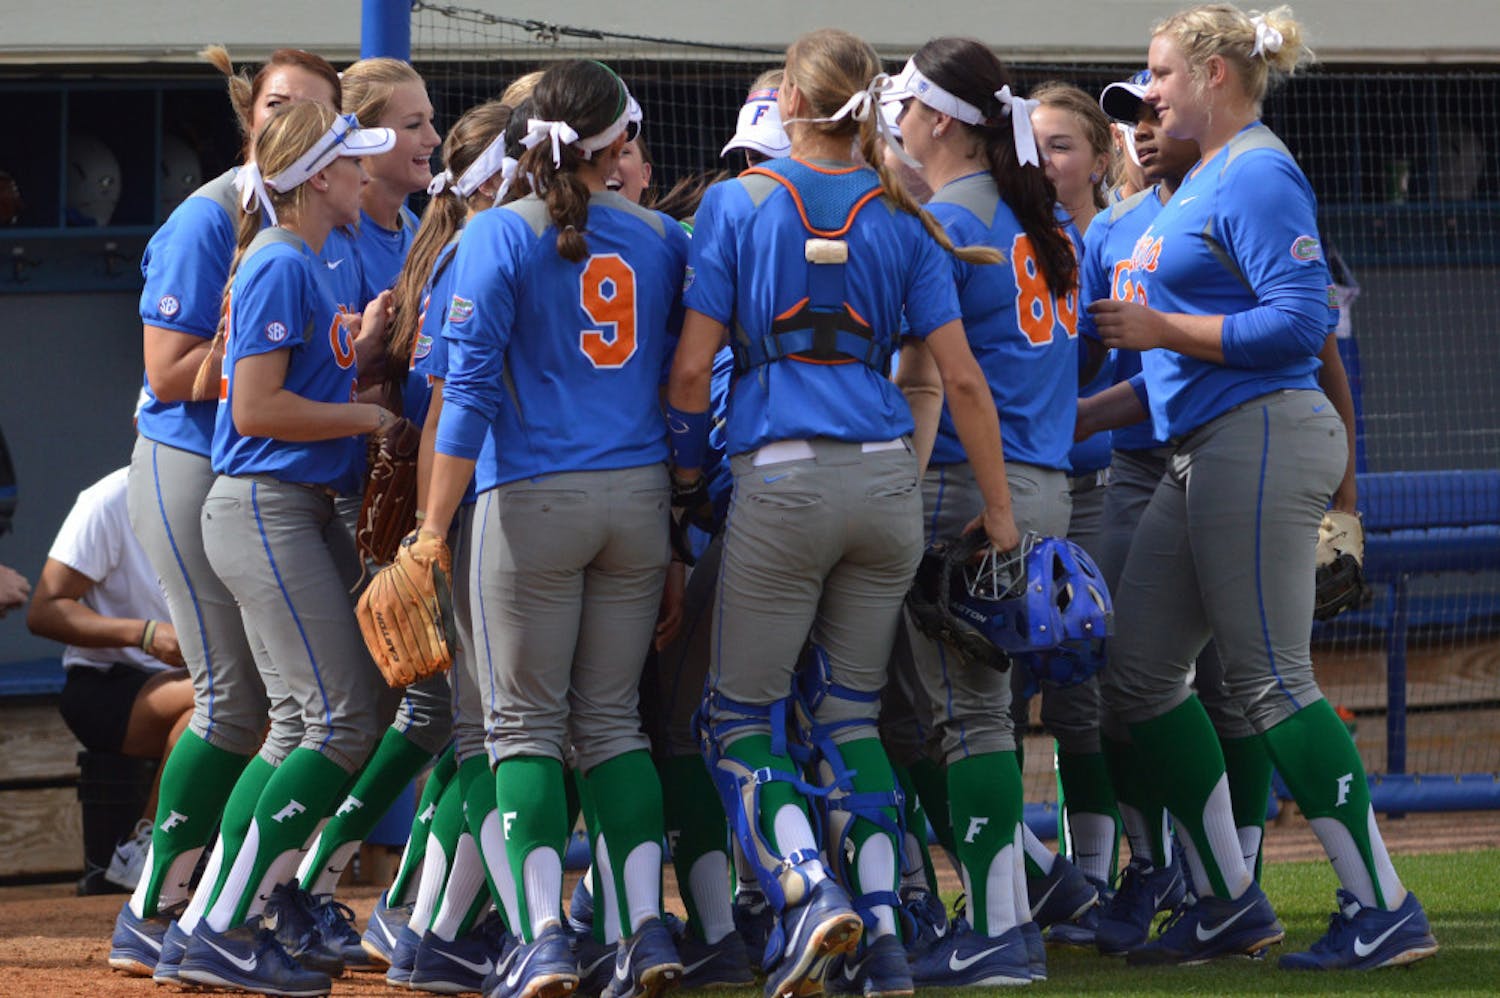 The Gators softball team huddles together prior to the start of Florida's 2-0 win against Ole Miss on March 9 at Katie Seashole Pressly Stadium.